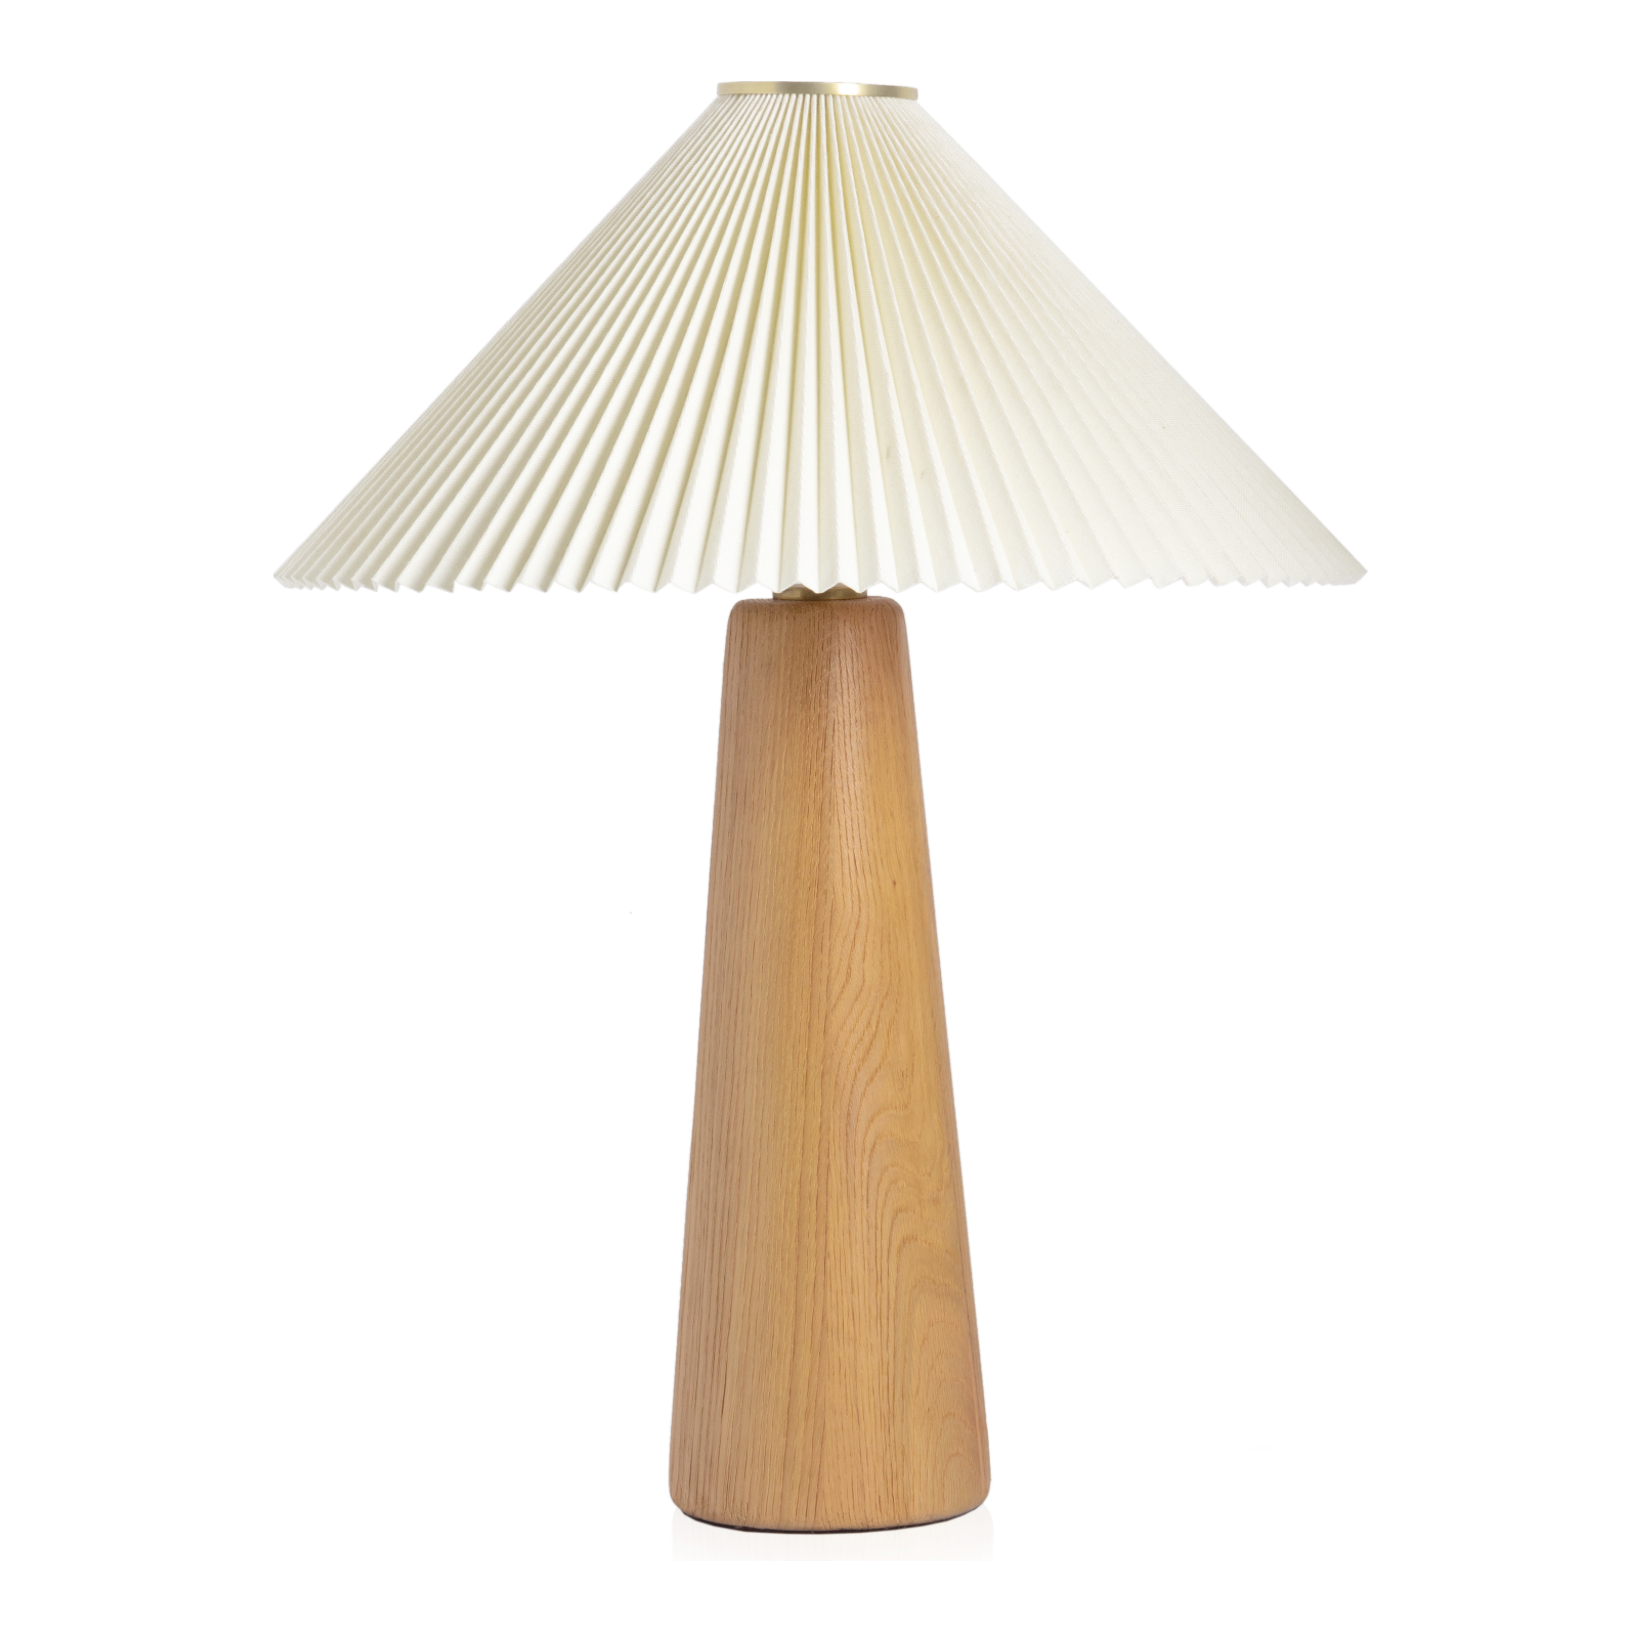 Modern minimal meets traditional. A tapered wood table lamp base is topped with a design-forward pleated shade. Amethyst Home provides interior design, new home construction design consulting, vintage area rugs, and lighting in the Salt Lake City metro area.